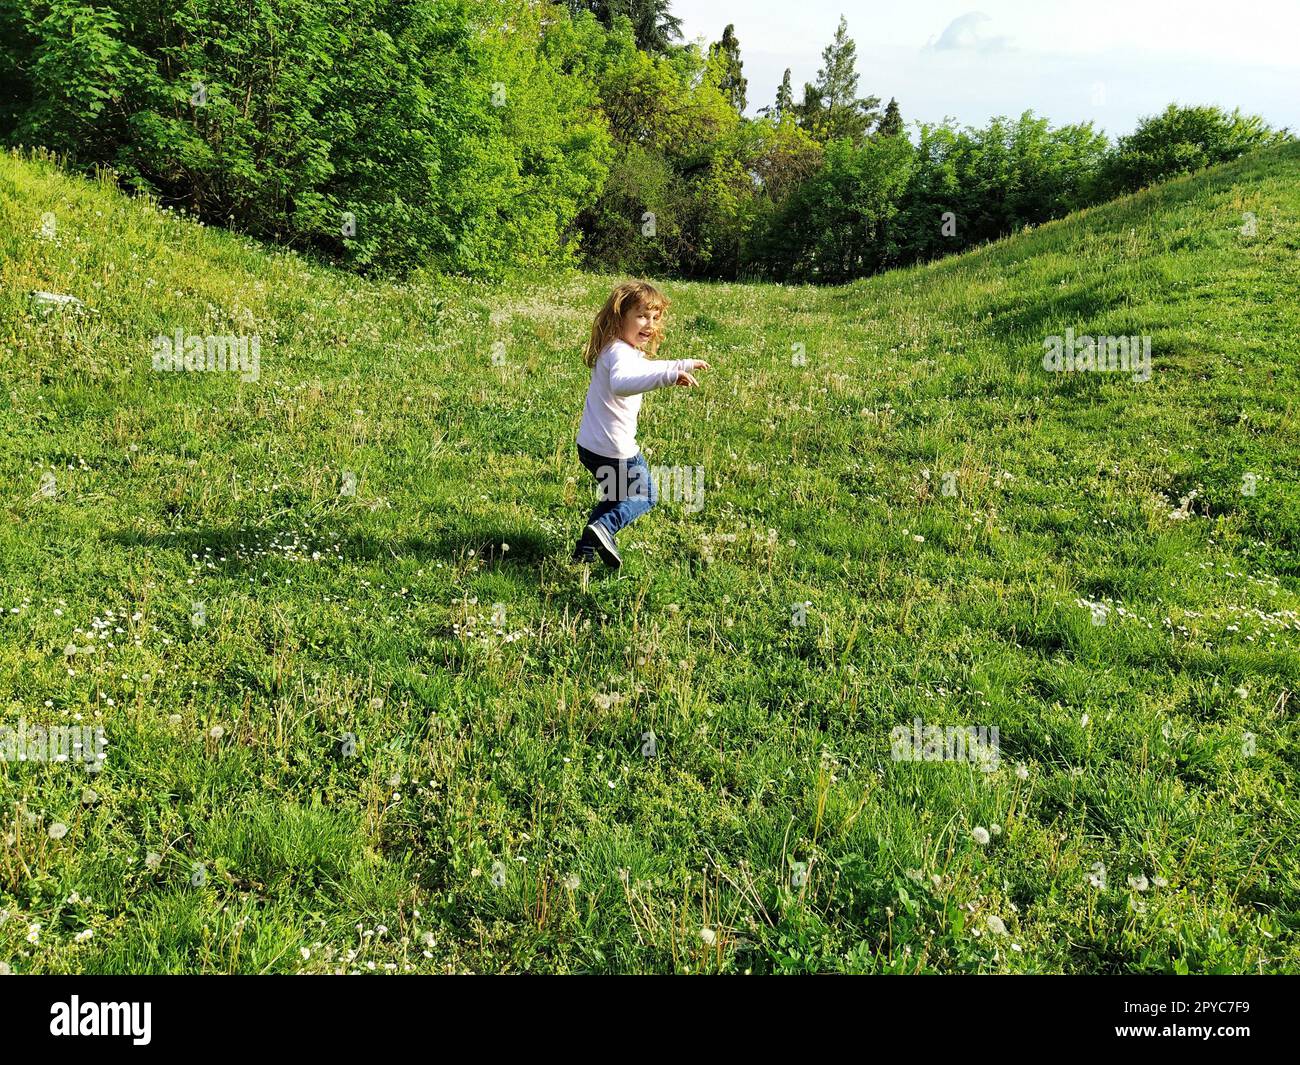 Girl runs across the field with trimmed green grass. the child is dressed in a white blouse and blue jeans. Summer evening. Children's fun. Girl with long blond hair Stock Photo